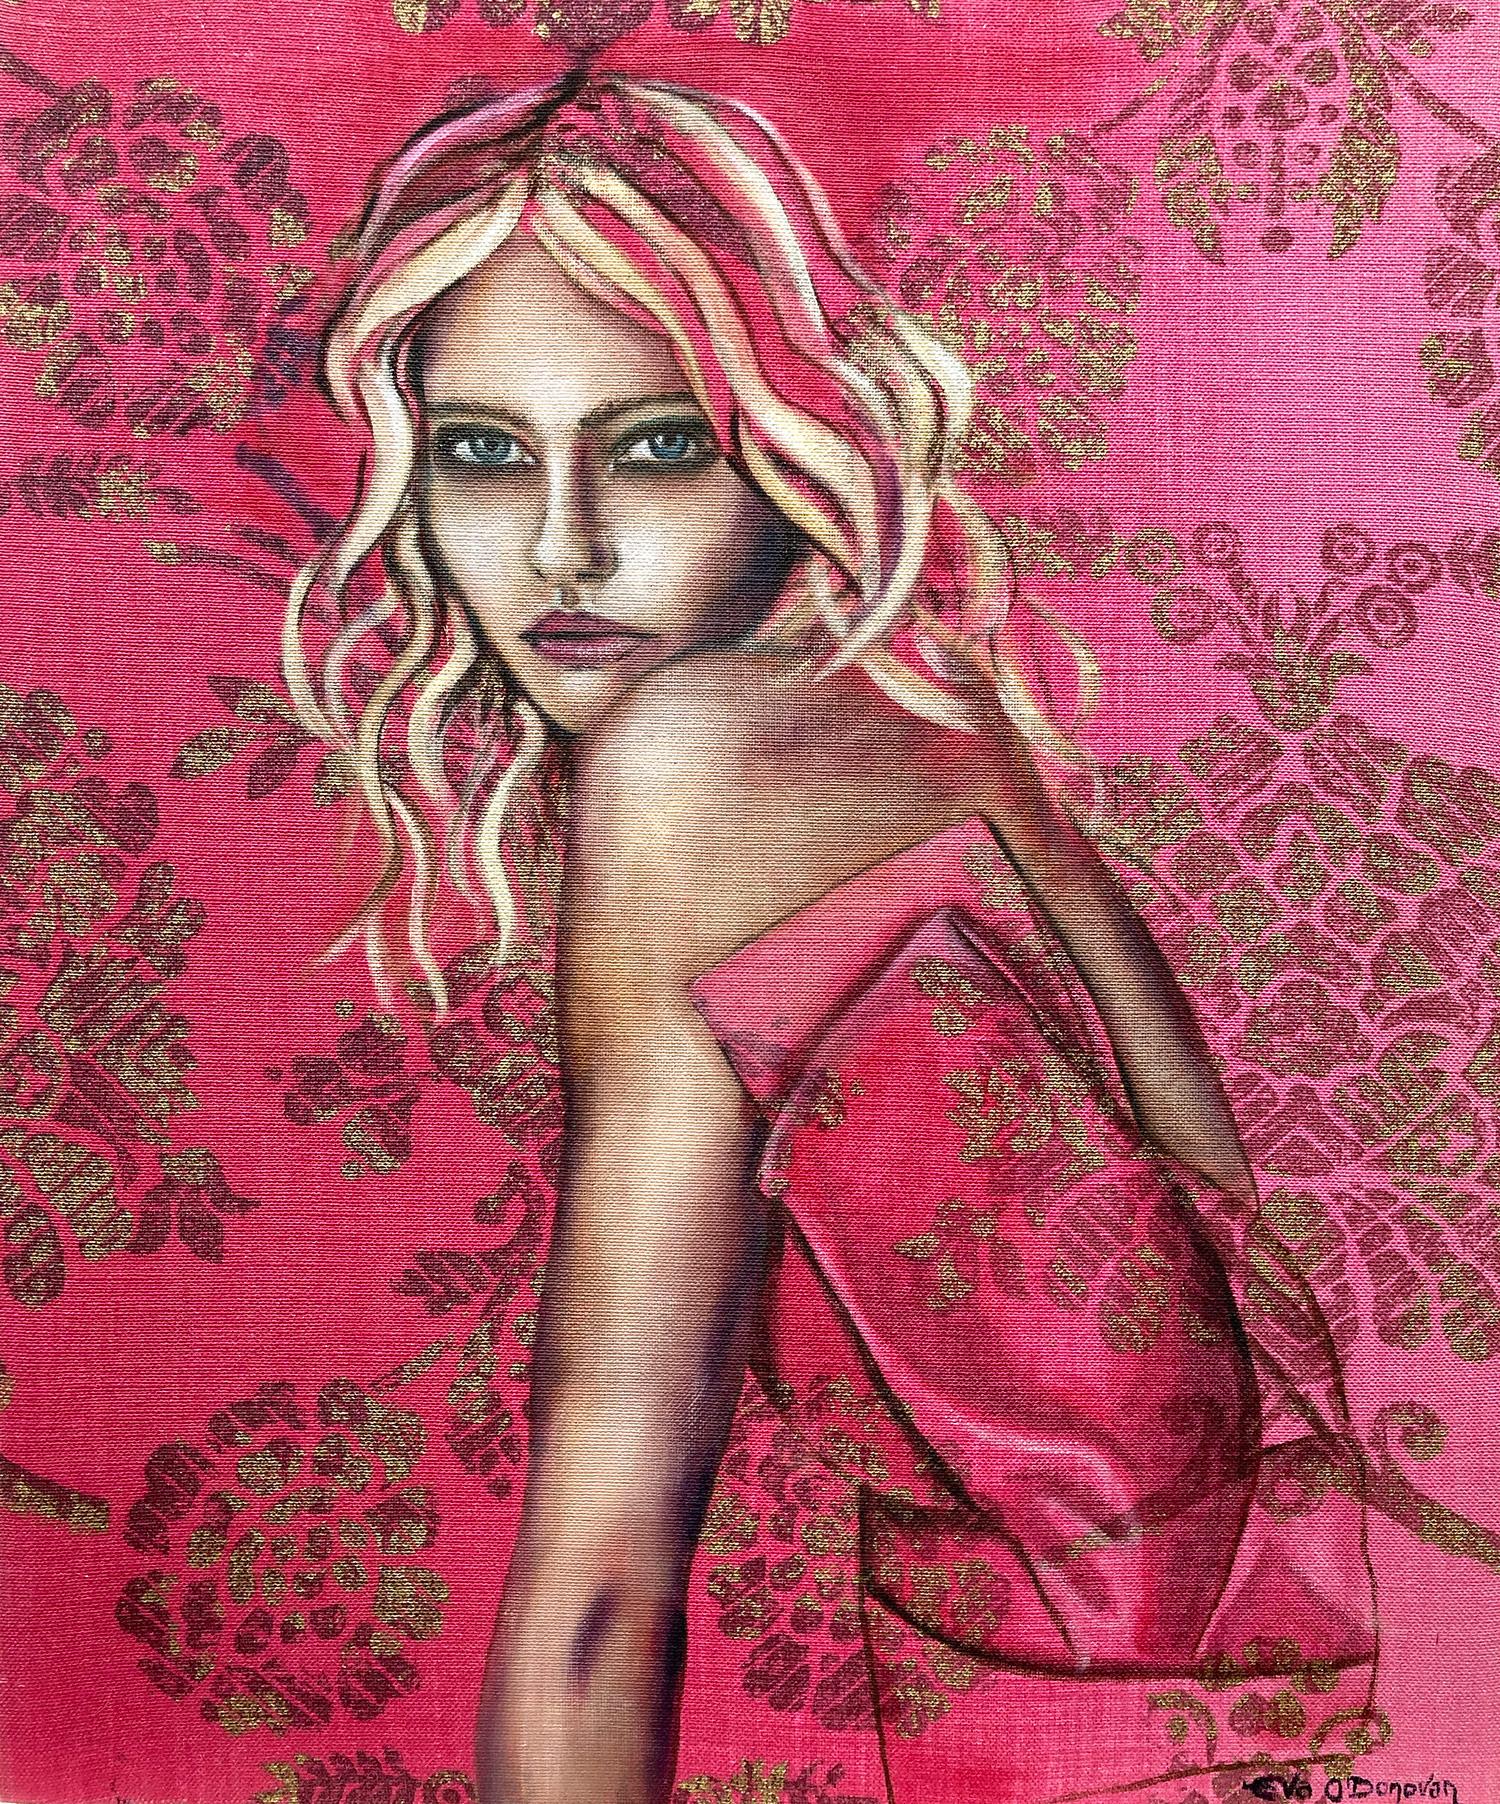 Eva O’Donovan  Abstract Painting - "Rosalyn" Contemporary Oil Painting on Fabric of Girl in Haute Couture Fashion